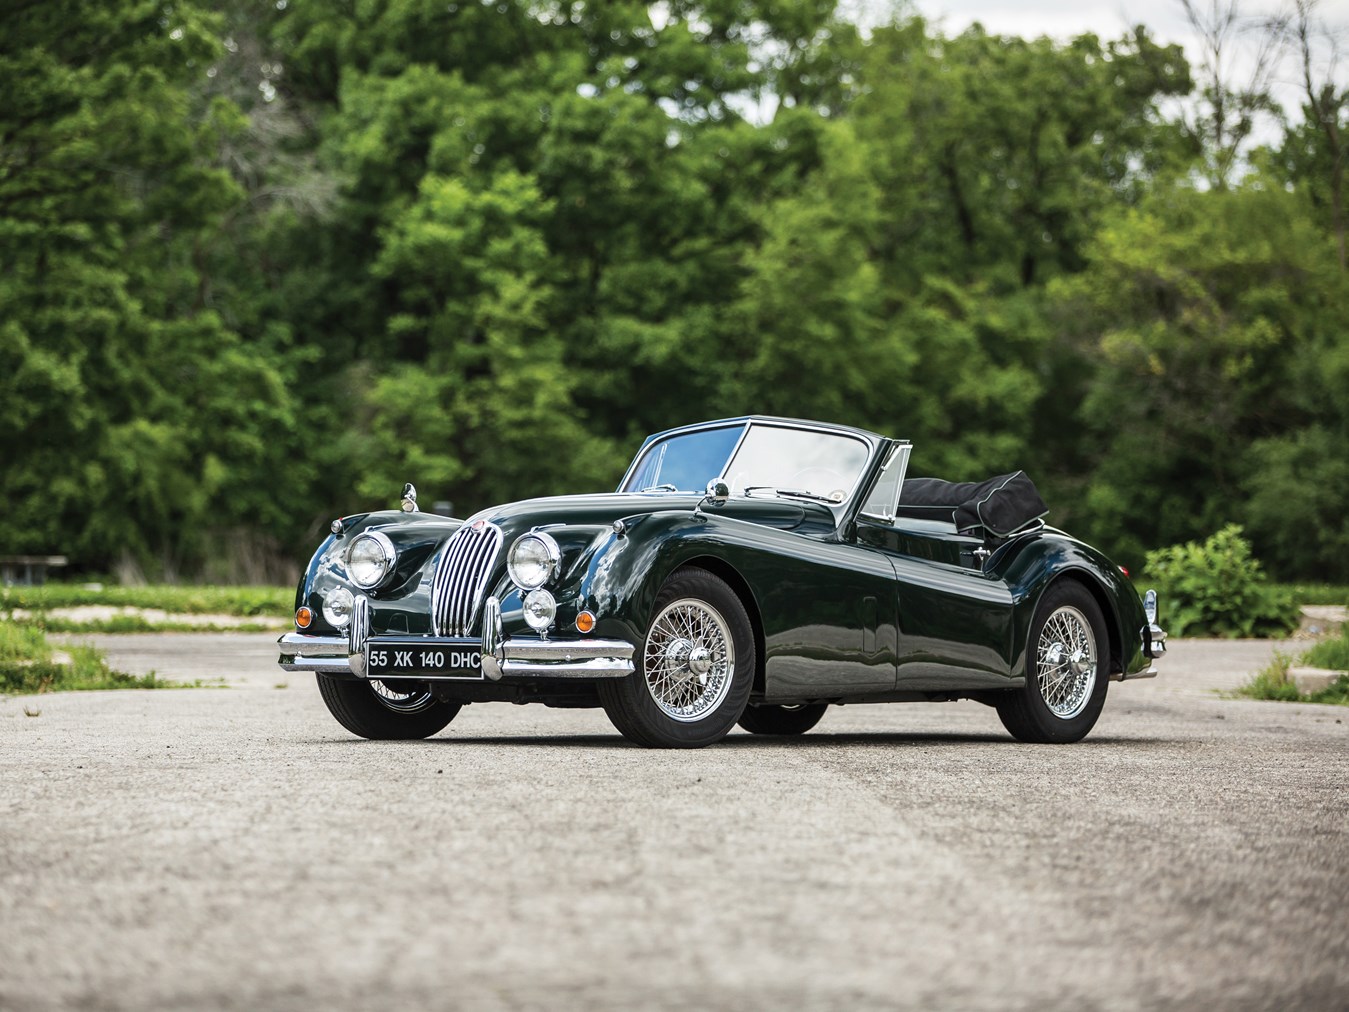 The Jaguar XK120 and the updated XK140 remain amongst the most beautiful cars of the forties and fifties.